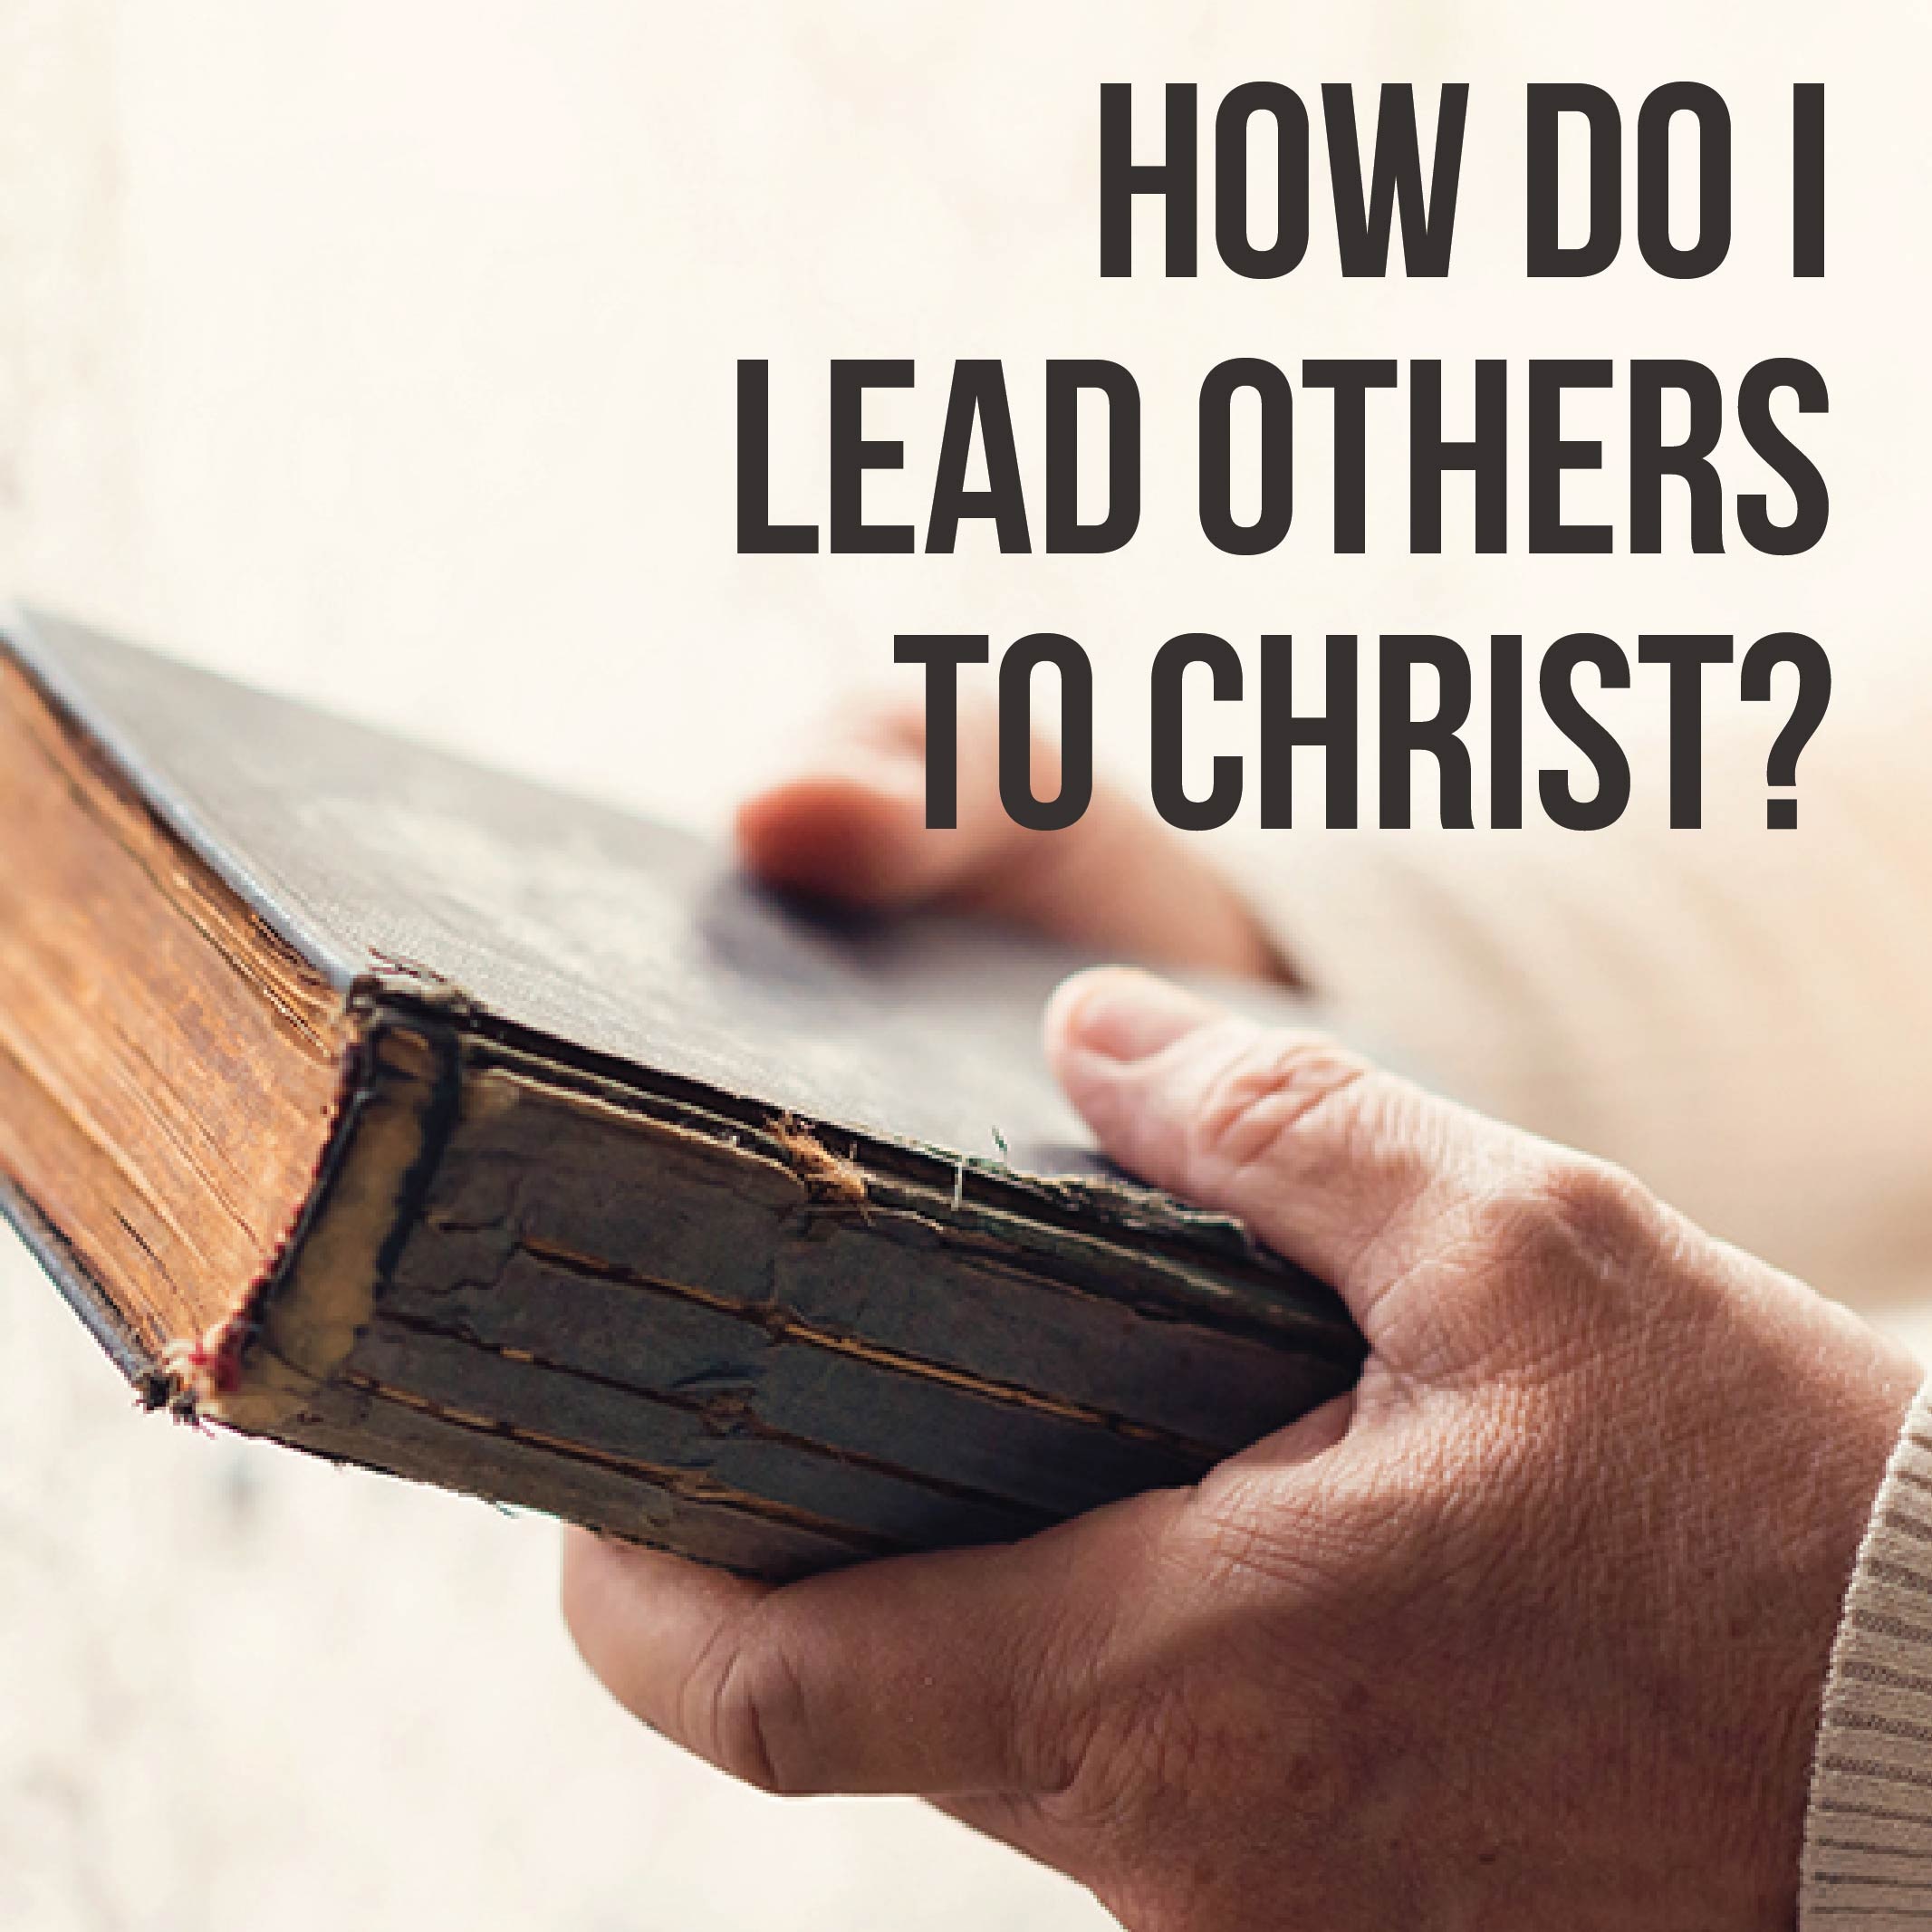 Leading a Sinner to Christ – The Right Way